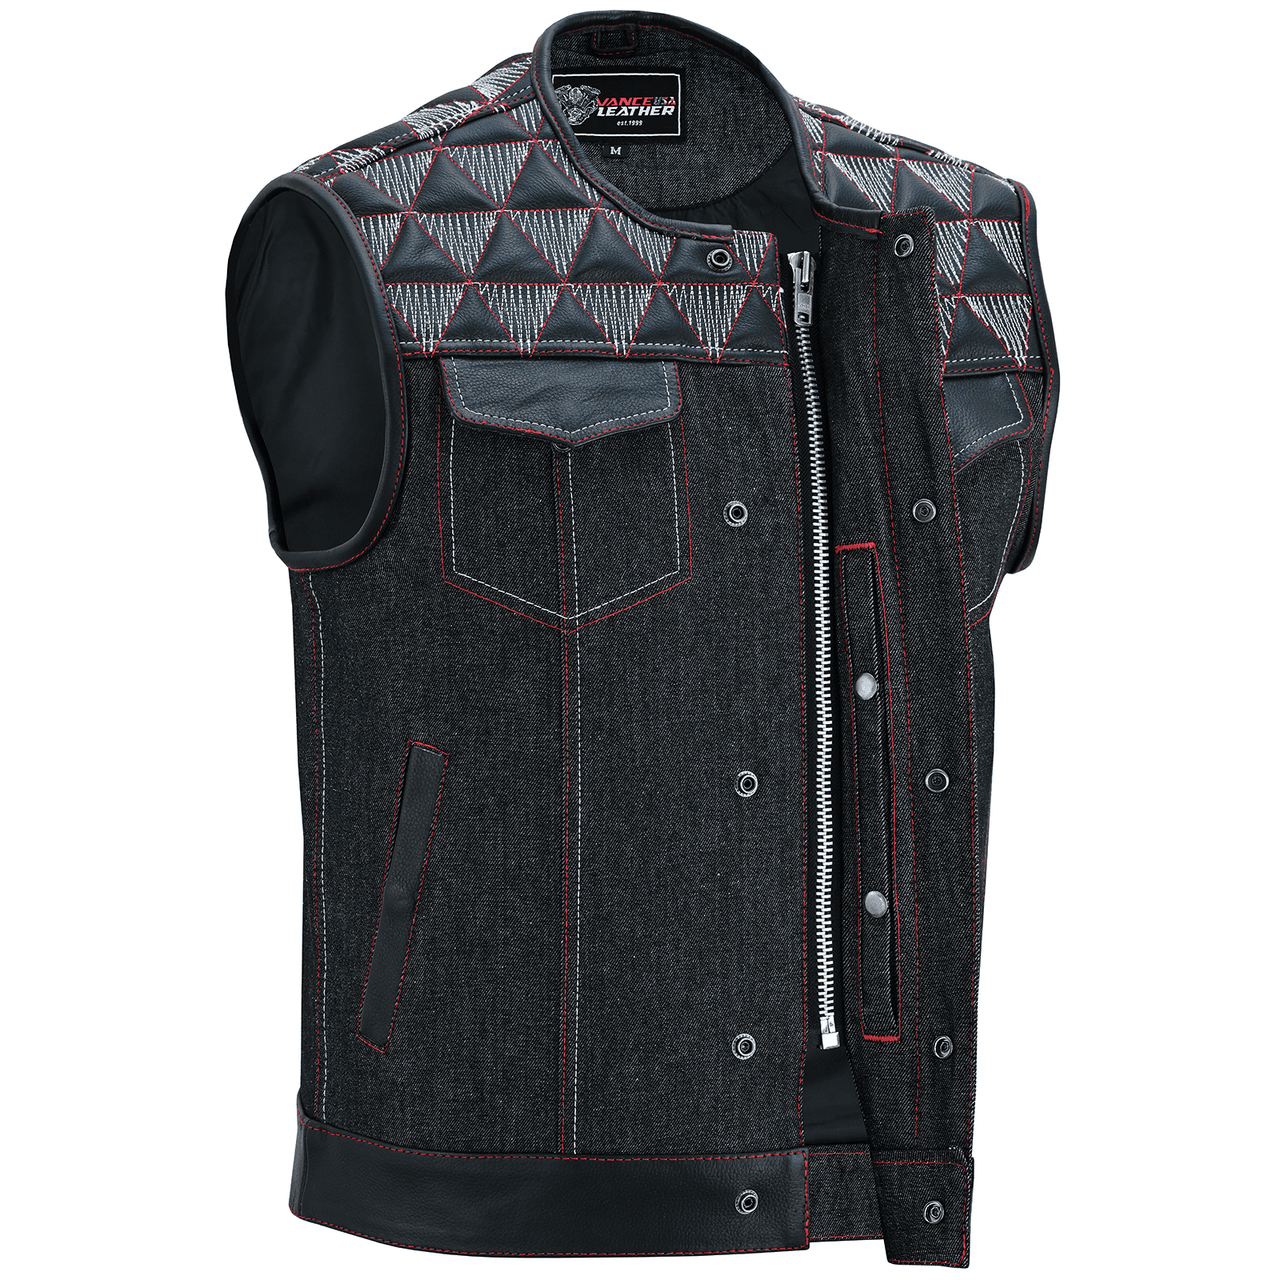 Men's-Denim-Leather-Motorcycle-Vest-with-Conceal-Carry-Pockets-SOA-Biker-Club-Vest-Red-White-Stitching-dual-zipper